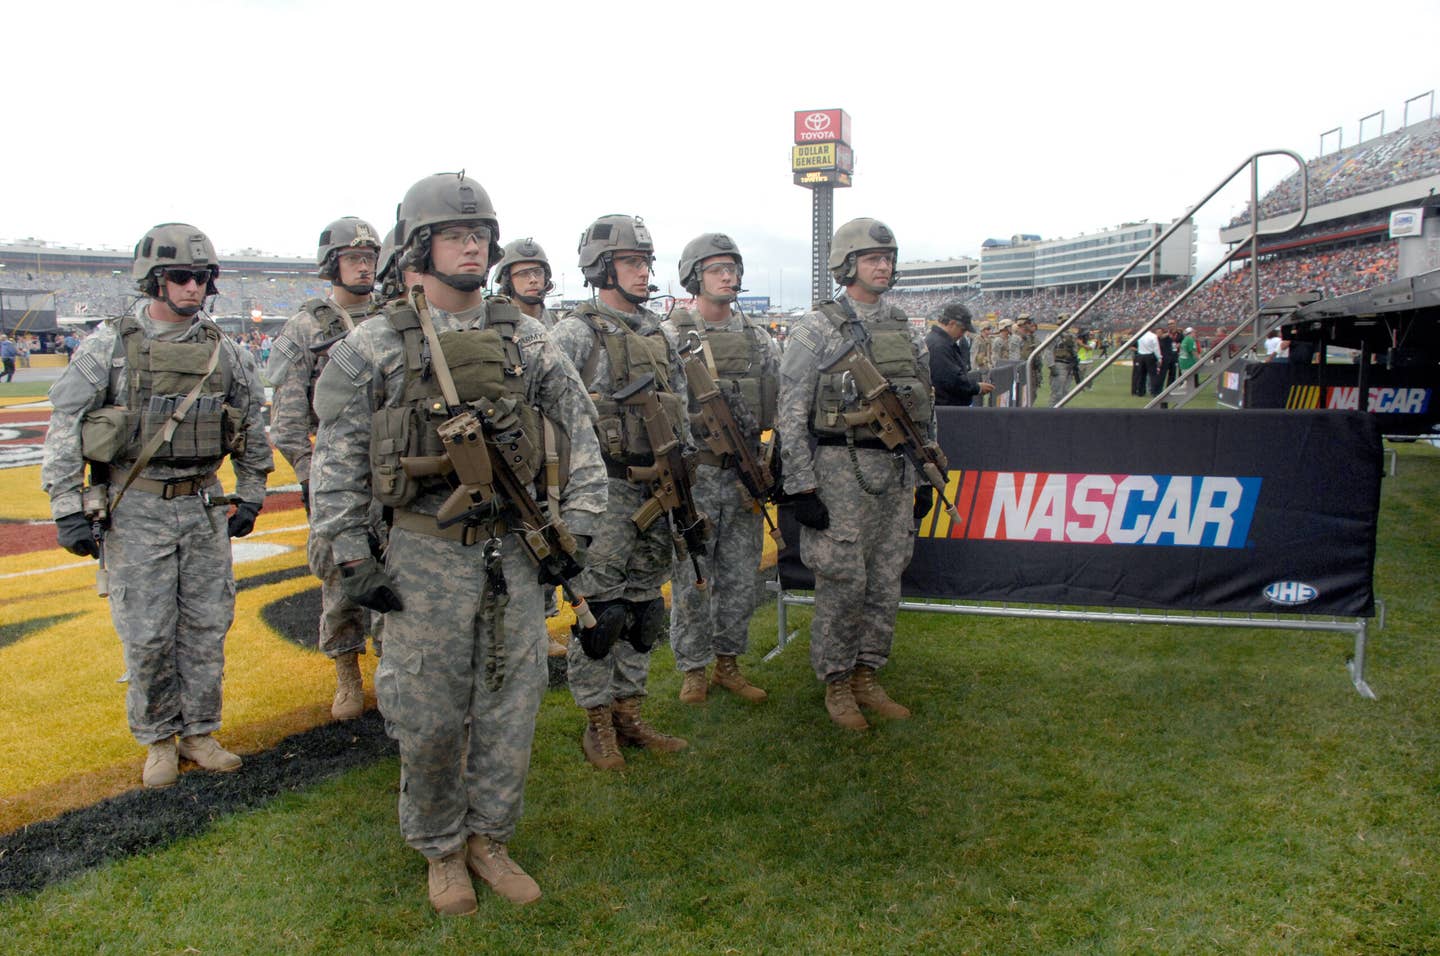 nascar soldiers